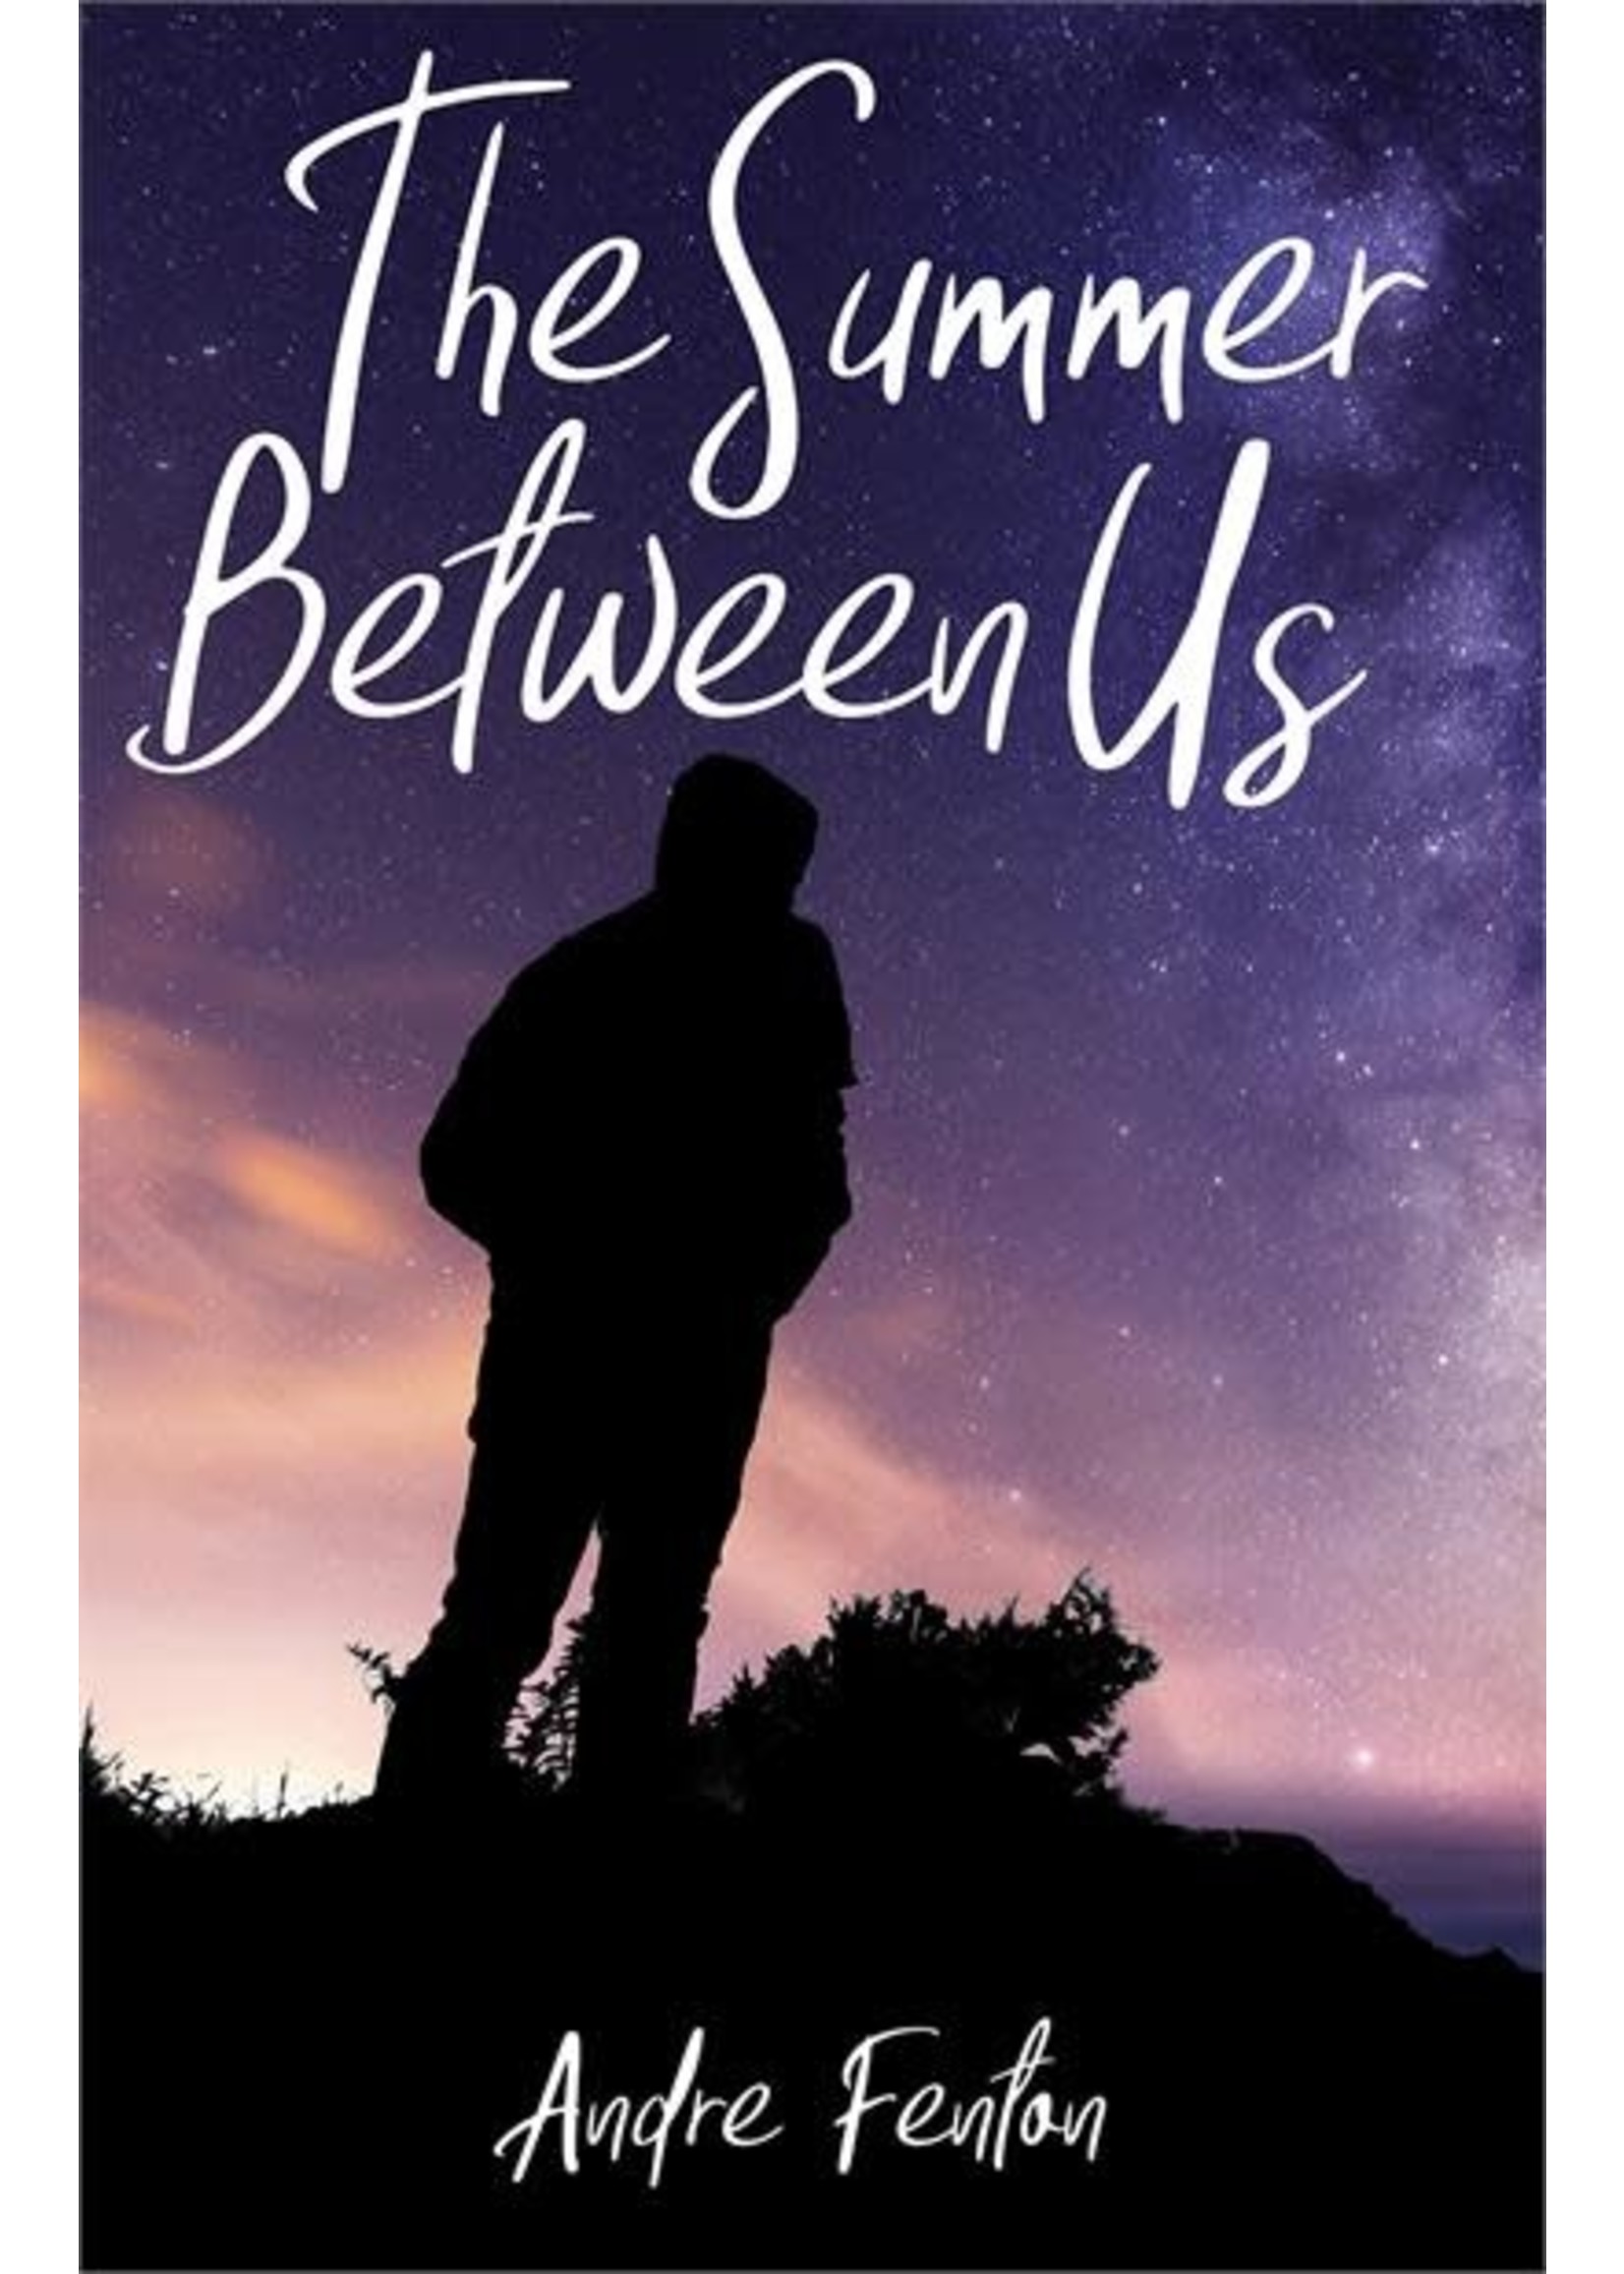 The Summer Between Us by Andre Fenton